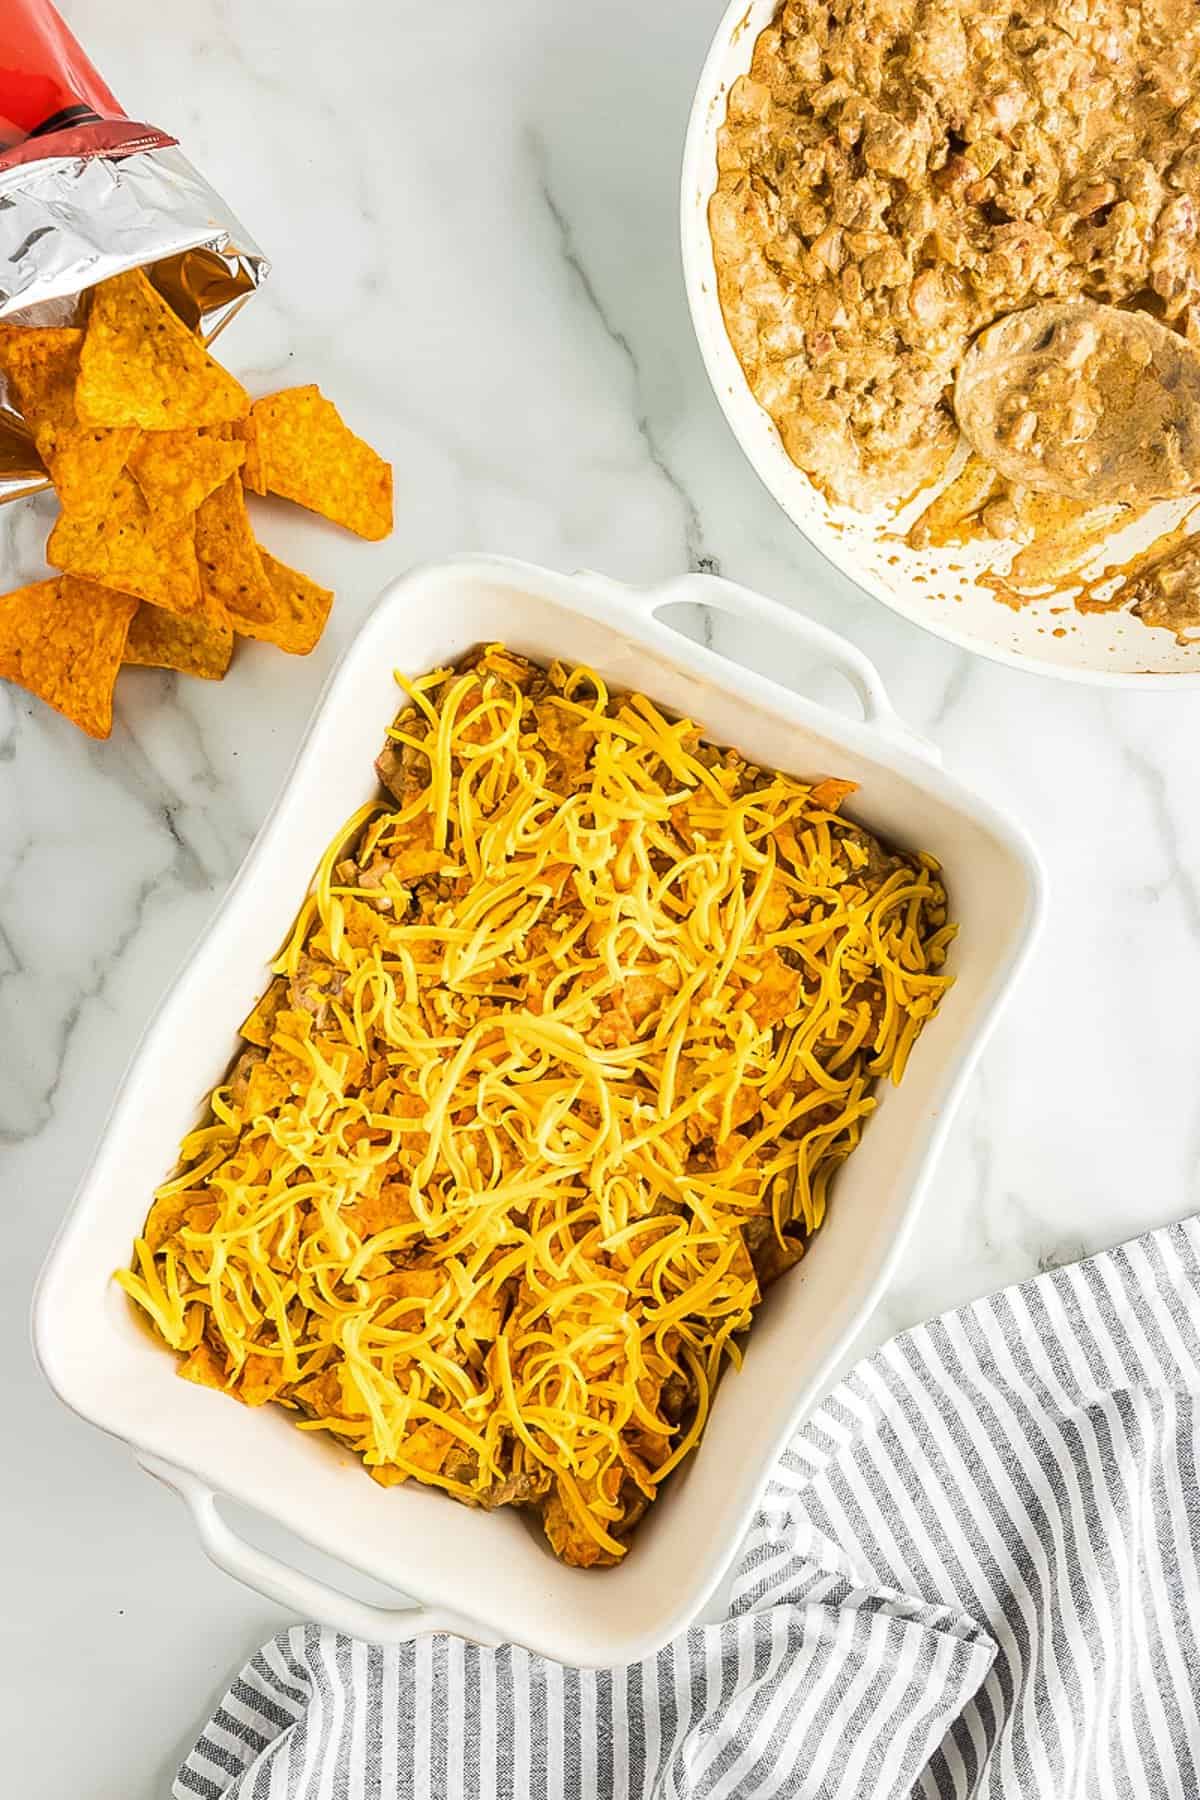 Grated cheese on top of casserole dish baking dish